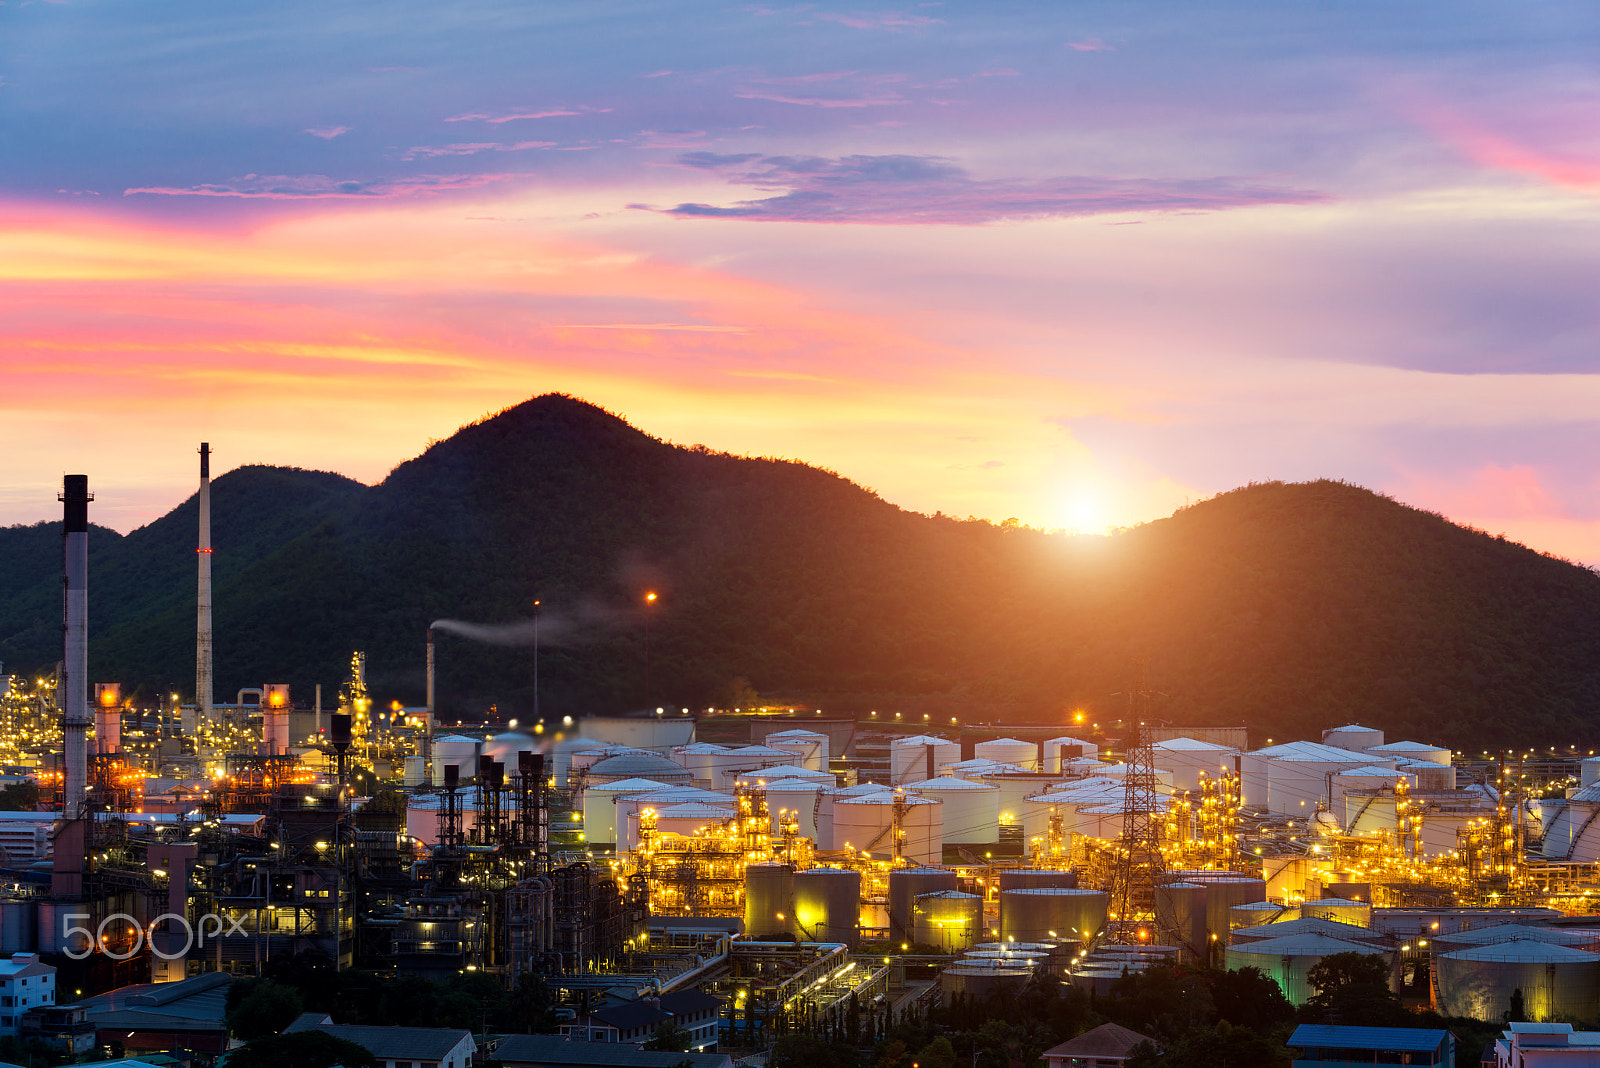 Nikon D800 sample photo. Oil refinery industry at night in chonburi, thailand. photography